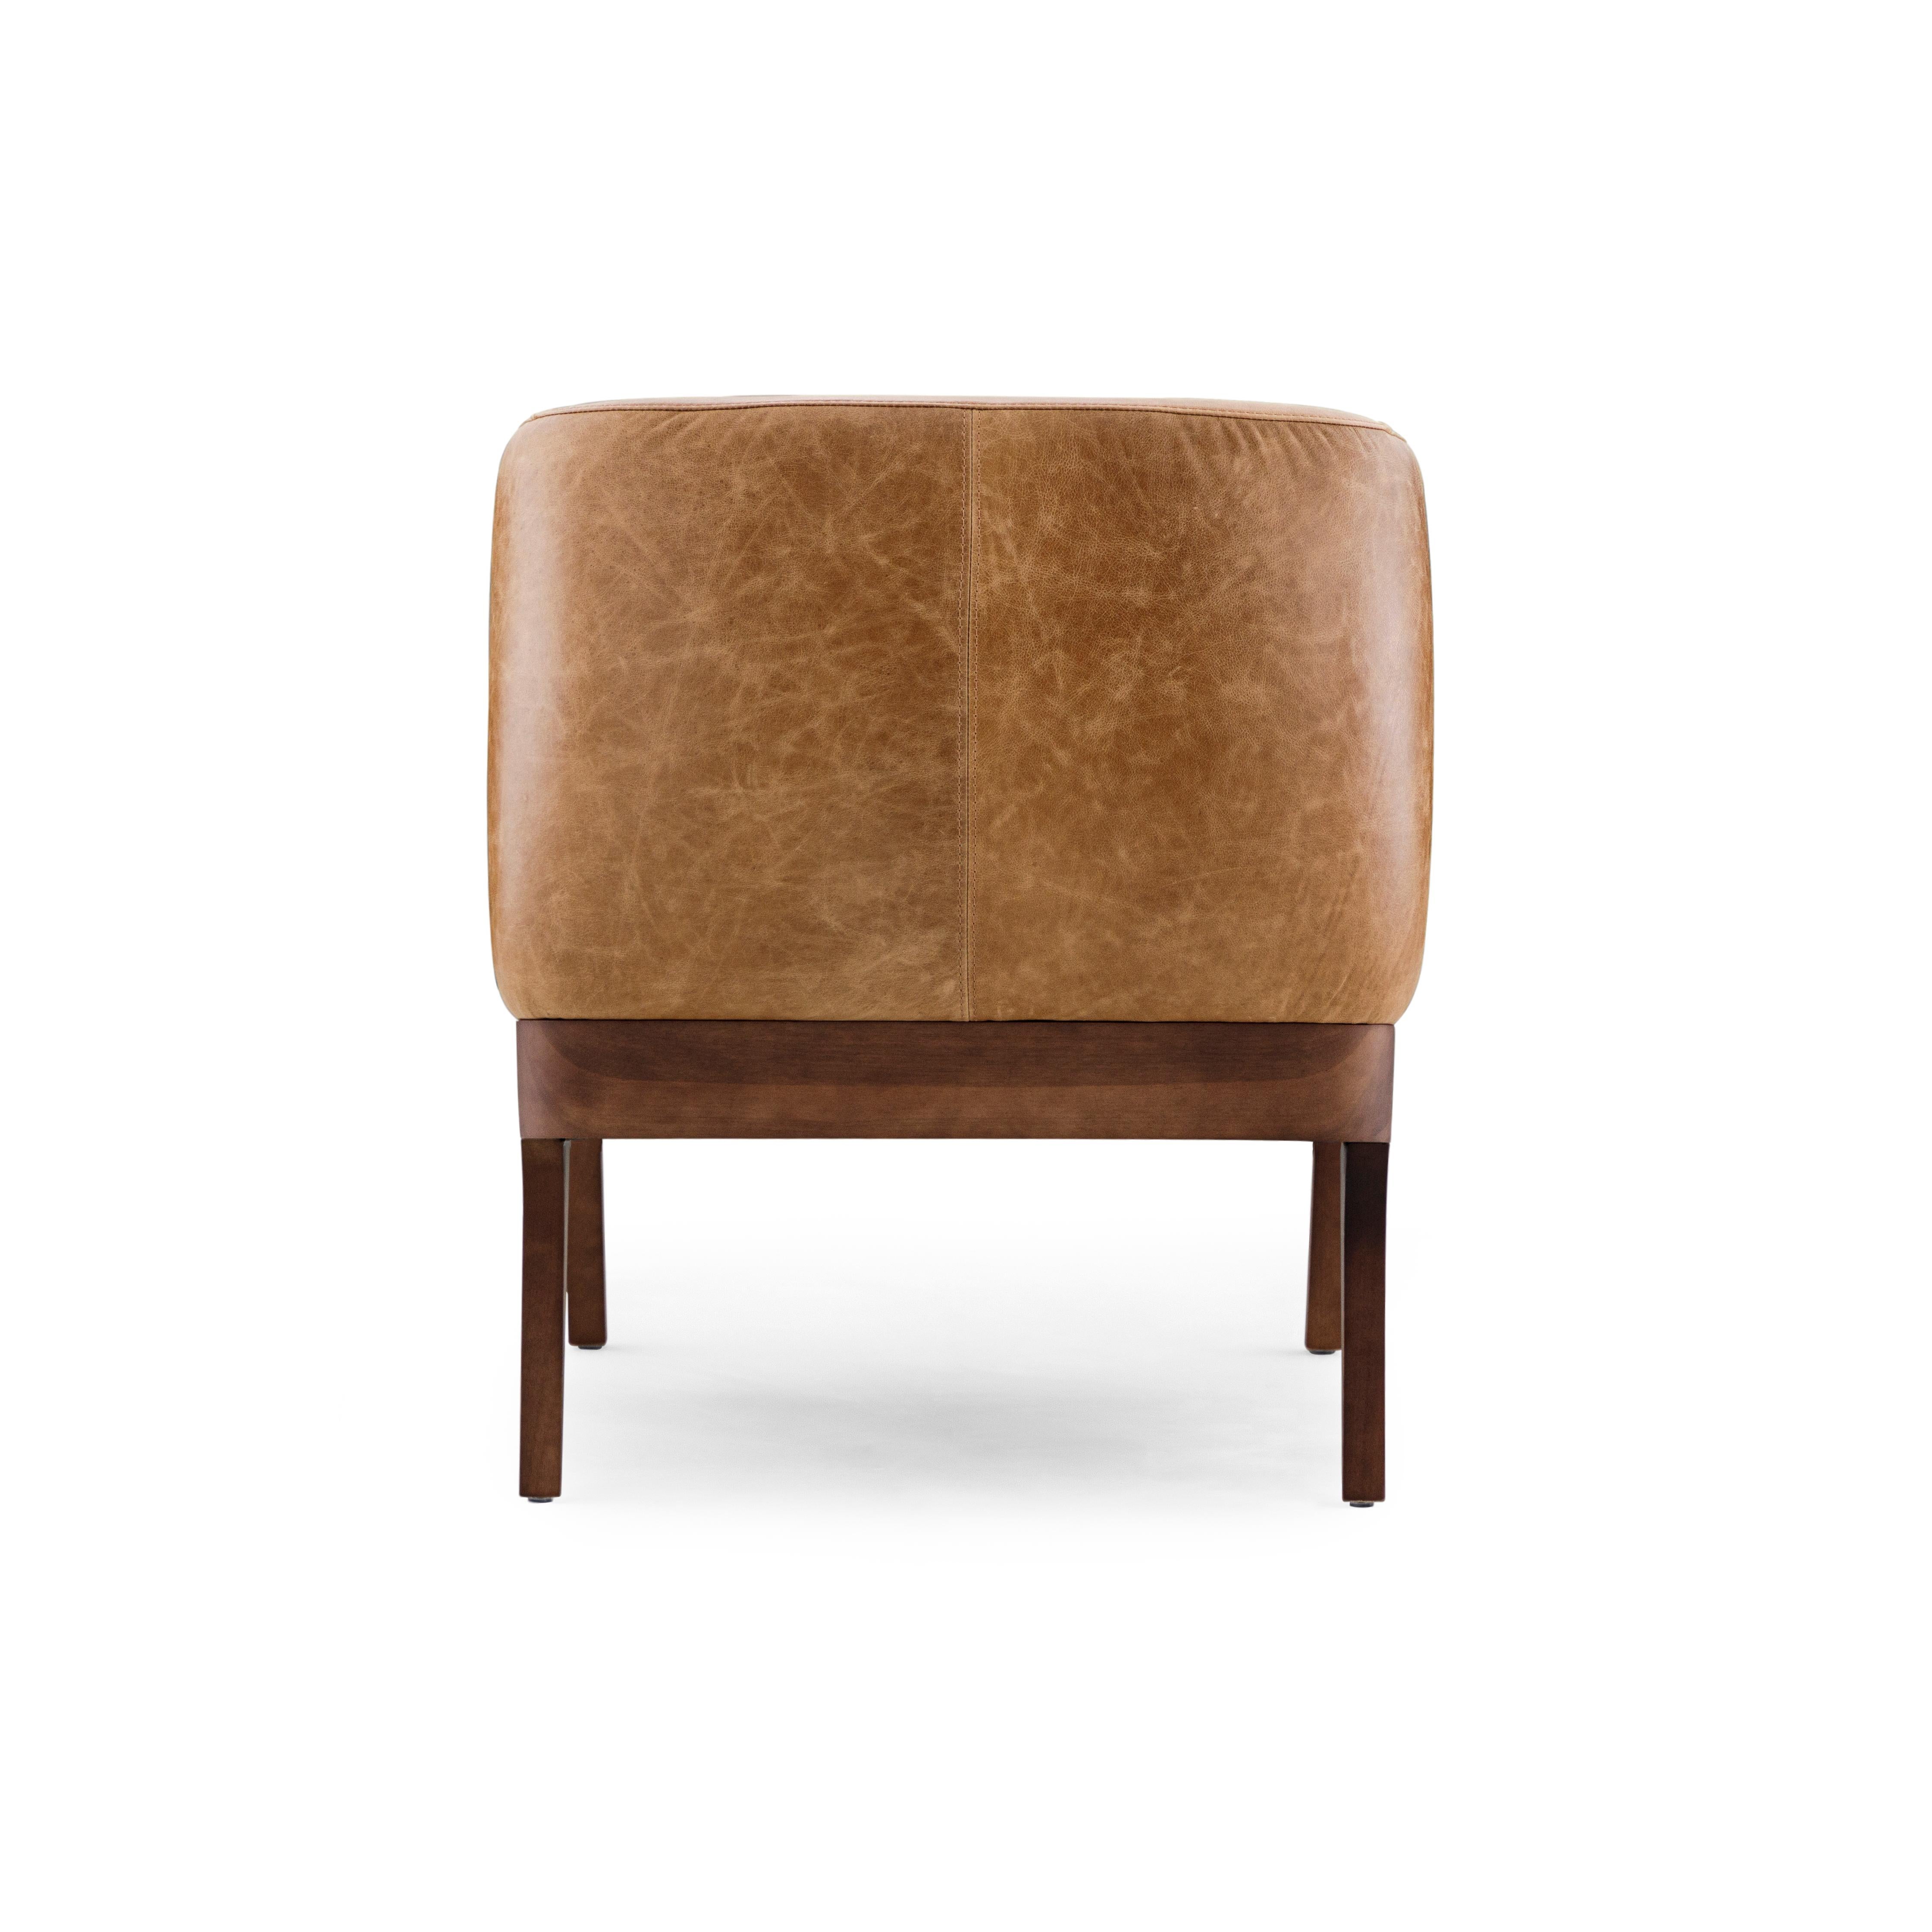 Abra Armchair in Brown Leather and Walnut Wood Finish In New Condition For Sale In Miami, FL